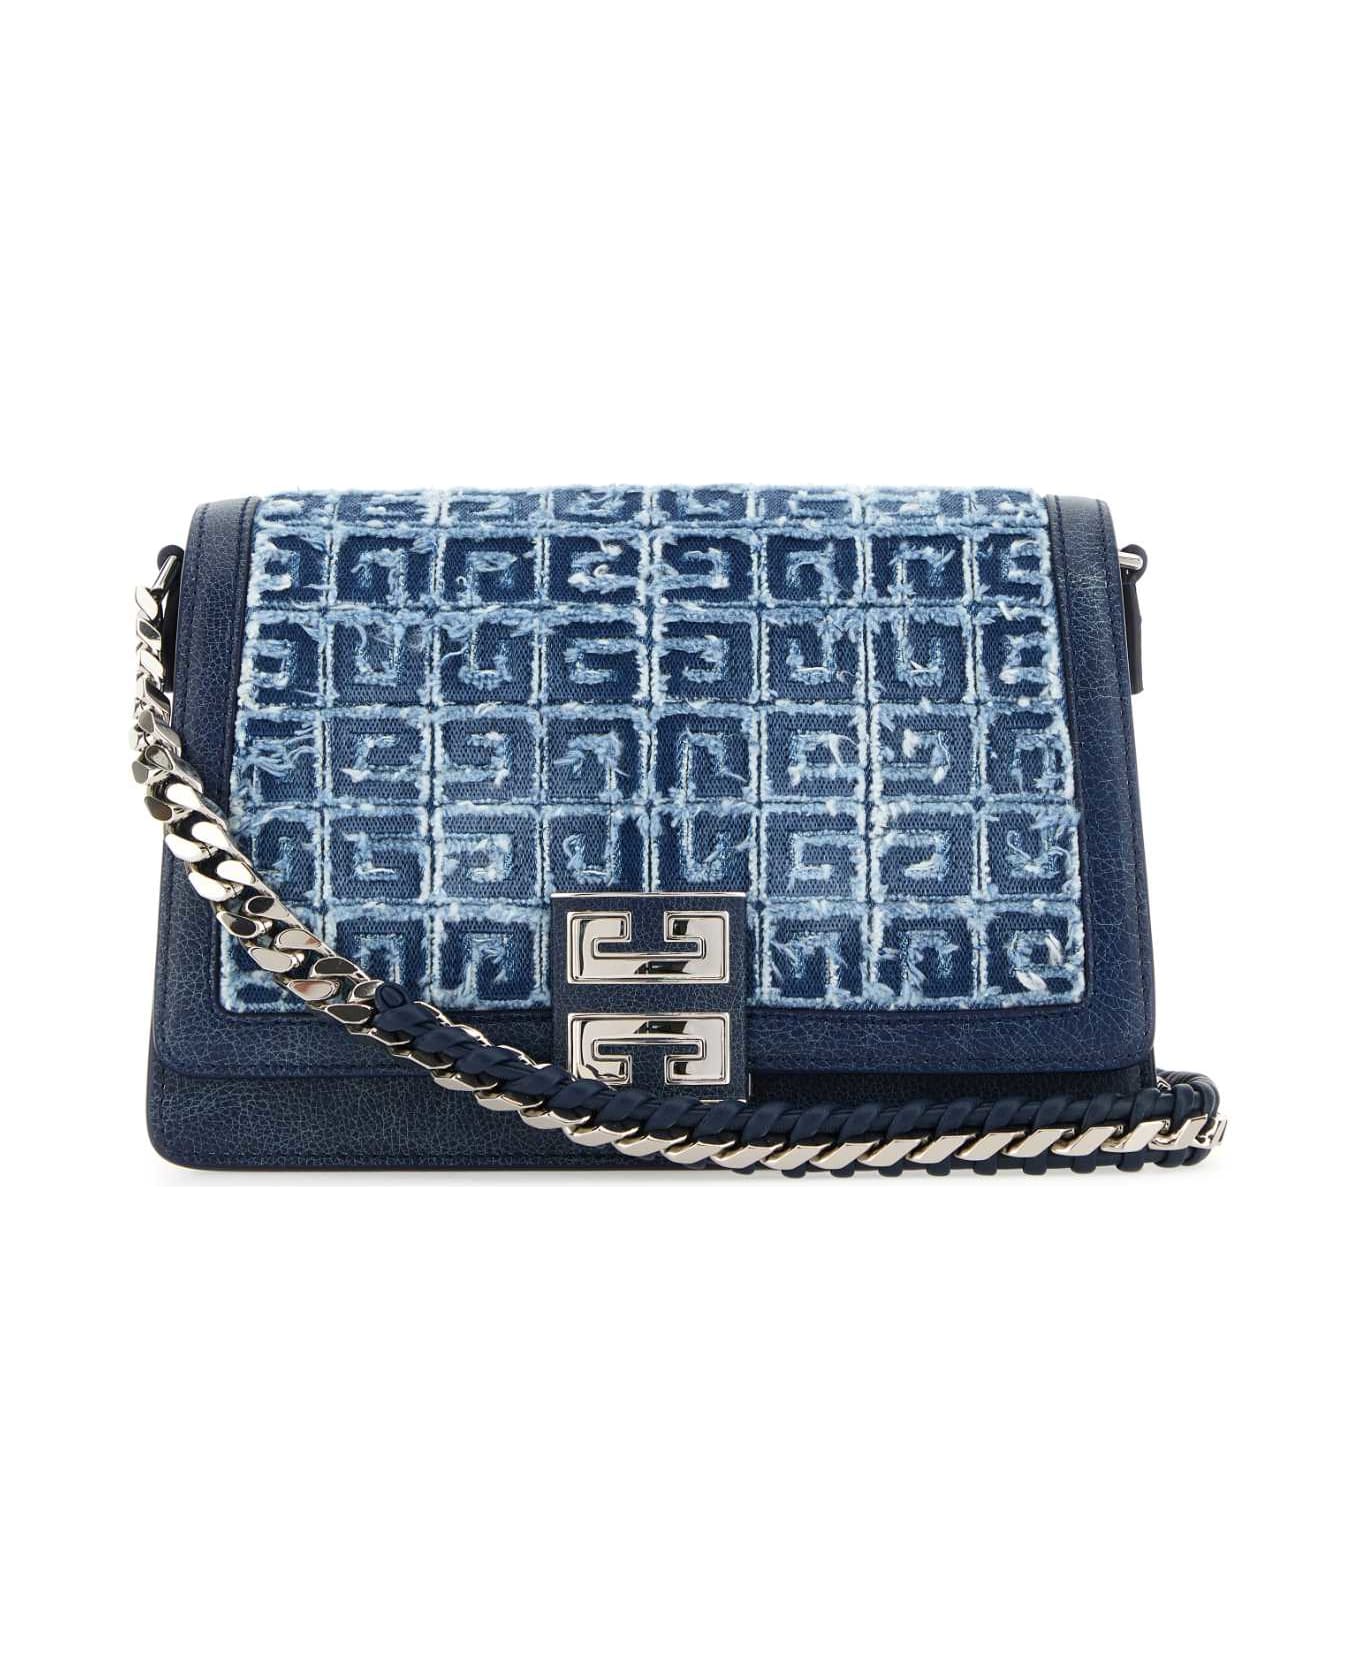 Givenchy Two-tone Denim And Leather Medium Multicarry Shoulder Bag - MEDIUMBLUE ショルダーバッグ